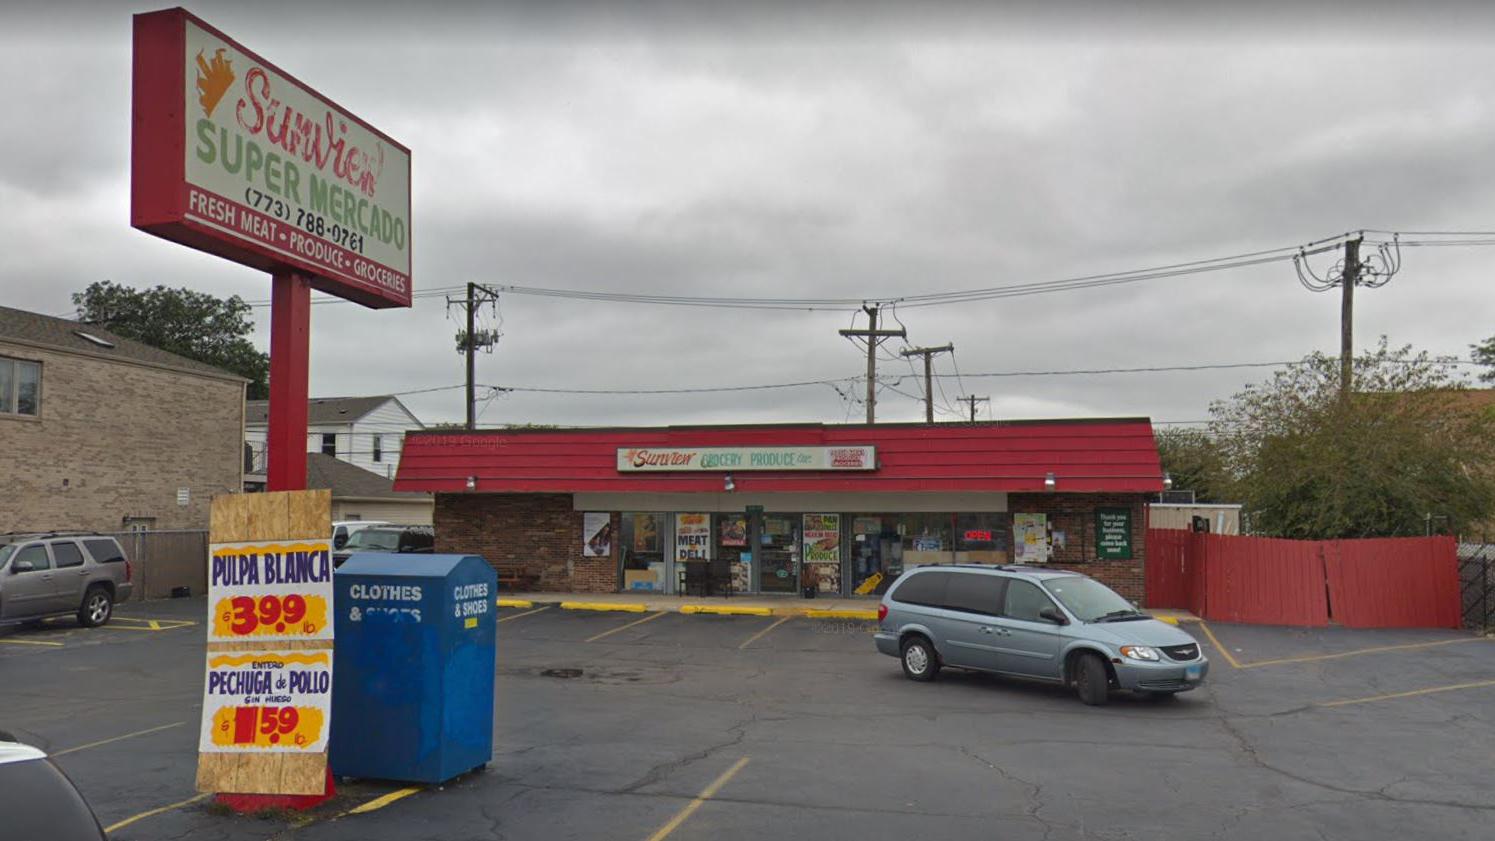 The Chicago Department of Public Health is investigating an outbreak of salmonella at Sun View Produce, located at 6110 W. 63rd St. (Google Maps)